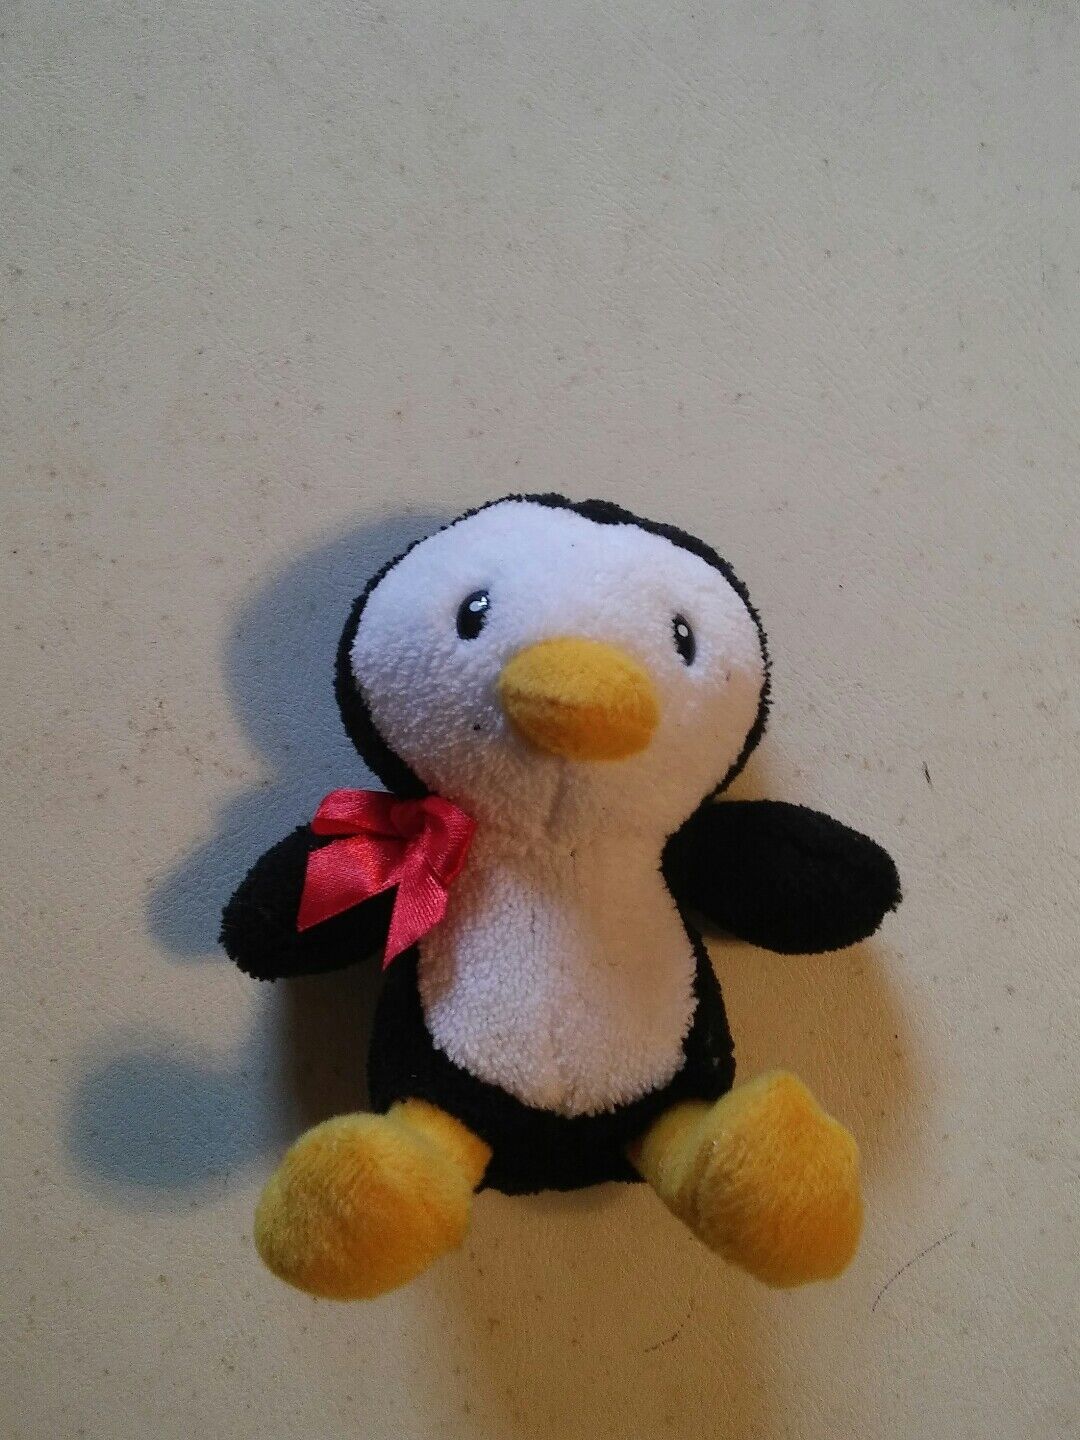 038 Cute 4.5 Inch Stuffed Penguin Just For You Animal - $2.99